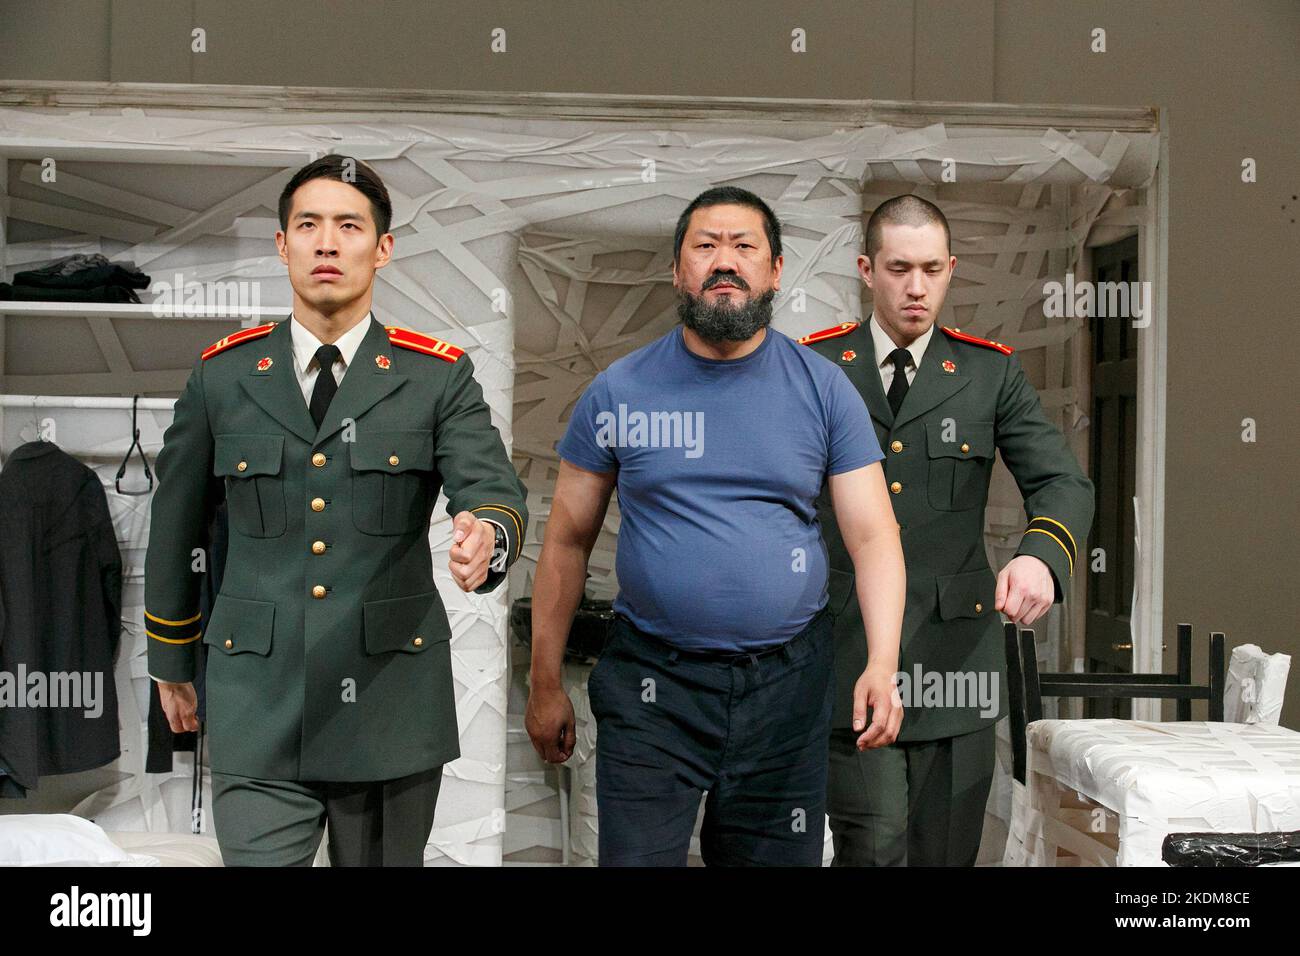 repetitive marching - l-r: Christopher Goh (2nd Soldier), Benedict Wong (Ai Weiwei), Andrew Koji (1st Soldier) in #aiww: THE ARREST OF AI WEIWEI by Howard Brenton at the Hampstead Theatre, London NW3  17/04/2013 design: Ashley Martin Davis   lighting: Matthew Richardson   director: James Macdonald Stock Photo